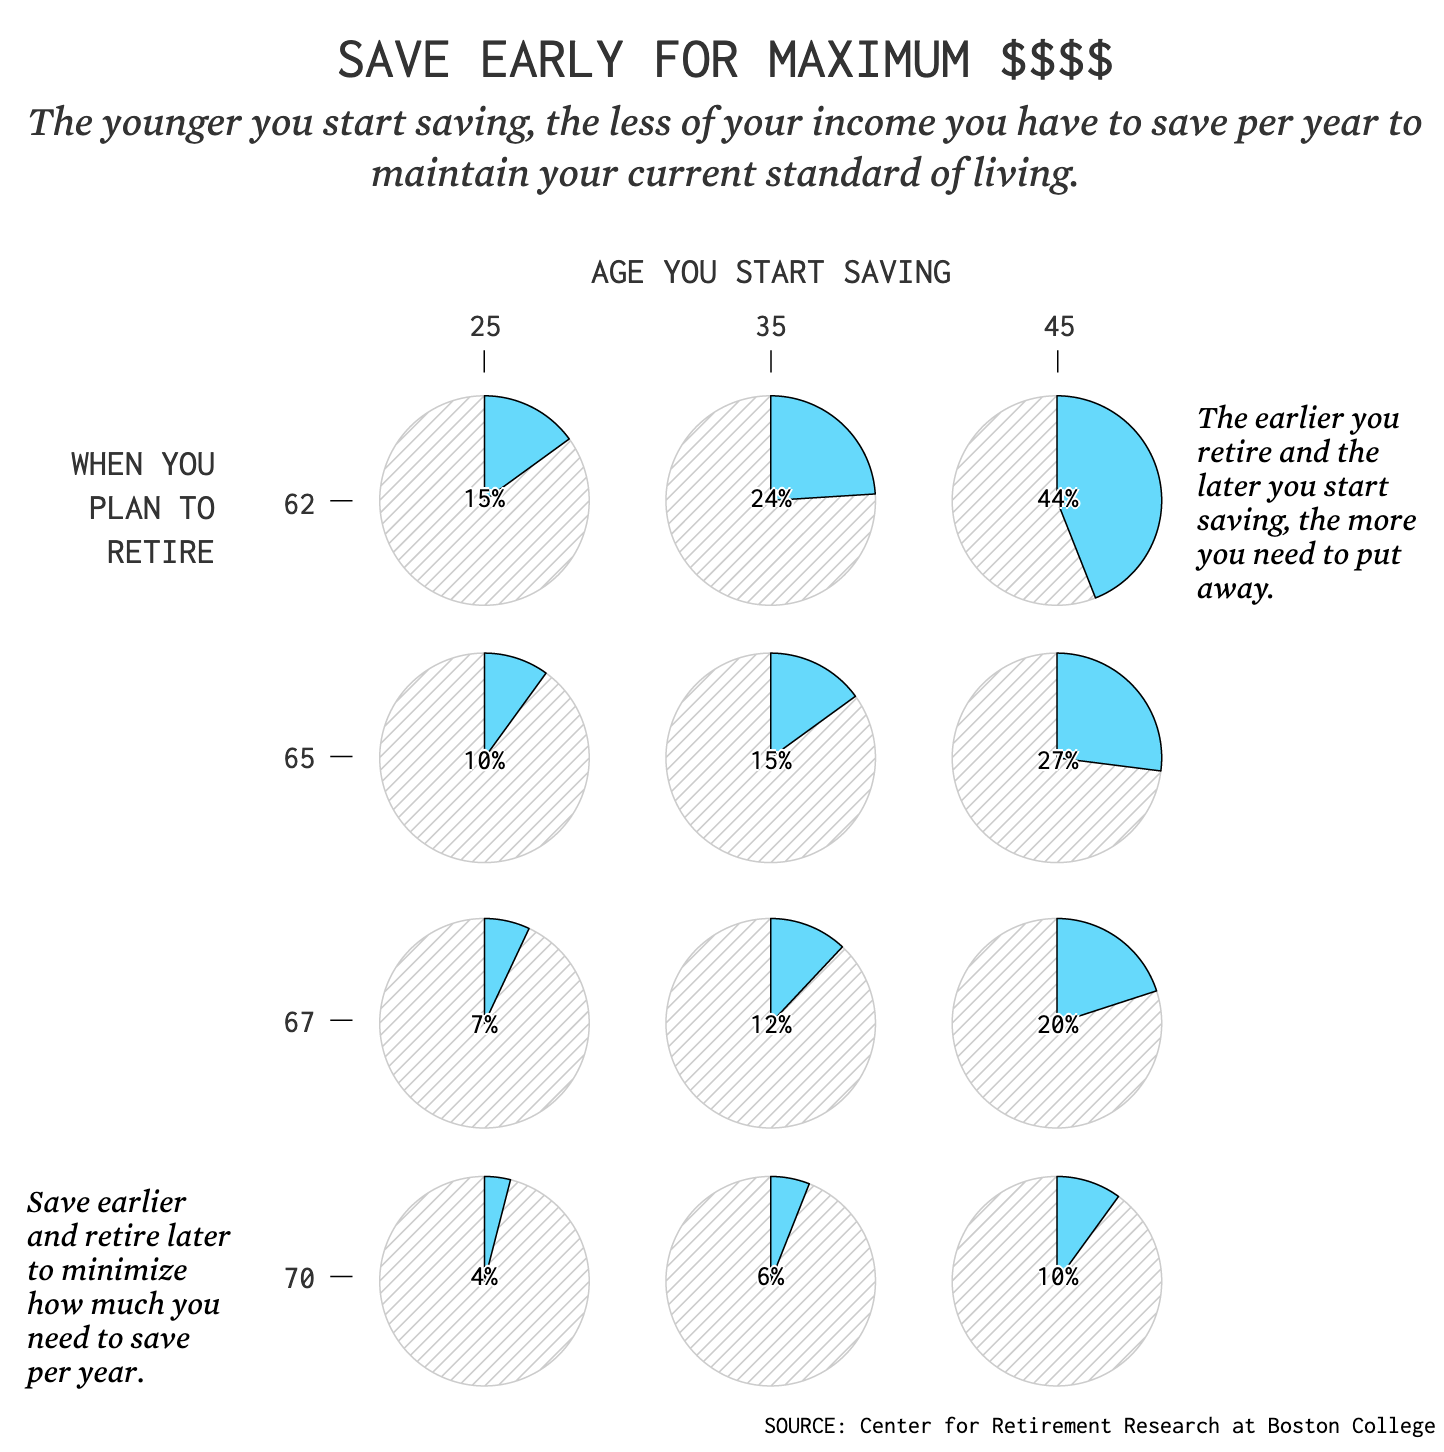 A series of small multiple pie charts showing the share of your income that you should spend on retirement higlighted in blue